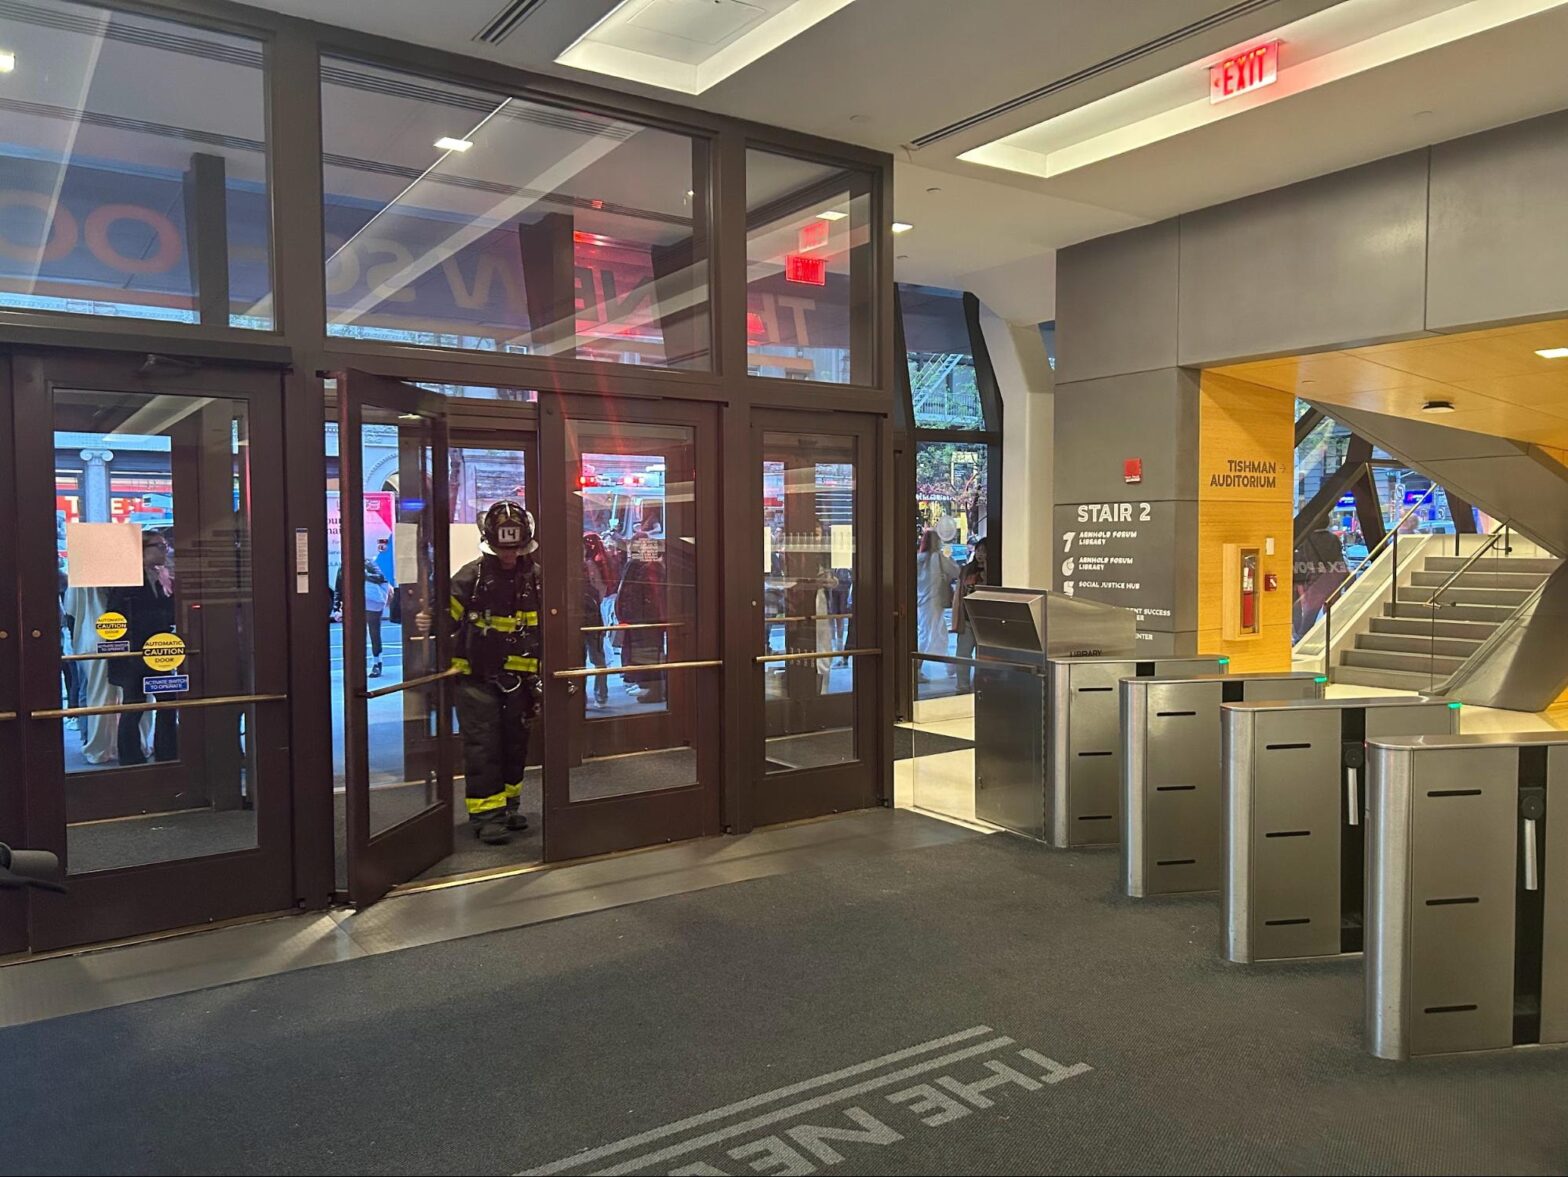 A firefighter dressed in a black and yellow fire suit walks through the glass doors into The New School University Center’s lobby.